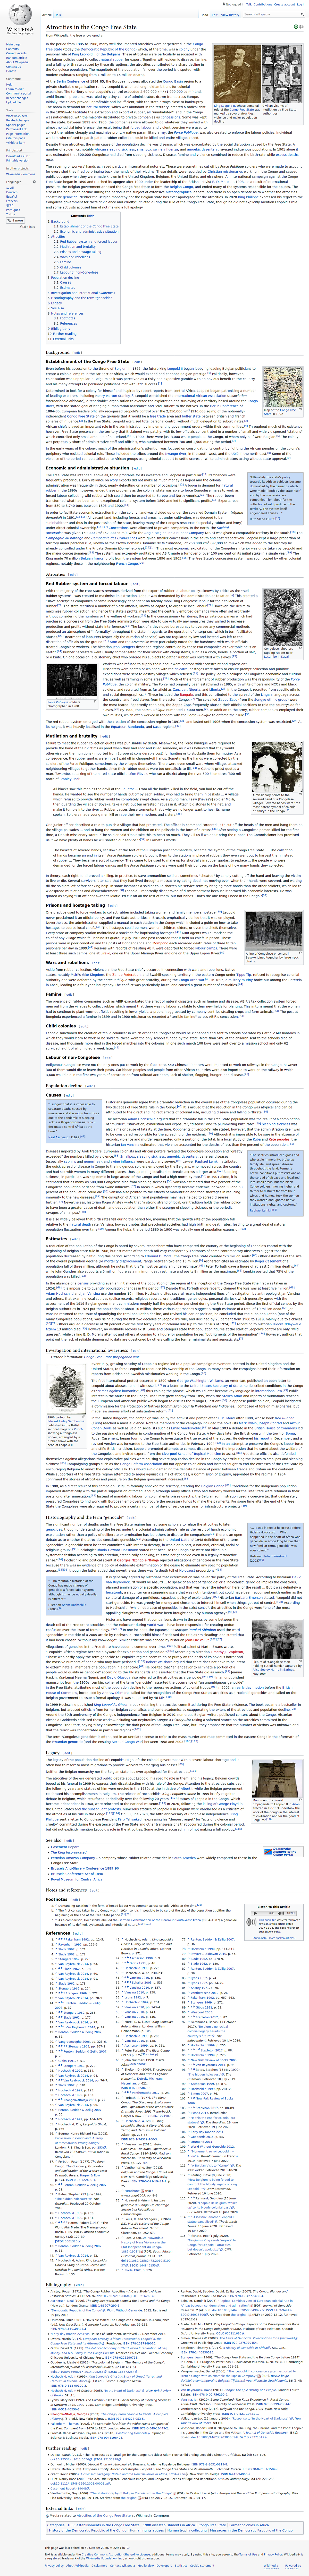 Wikipedia Congolese genocide denial.png